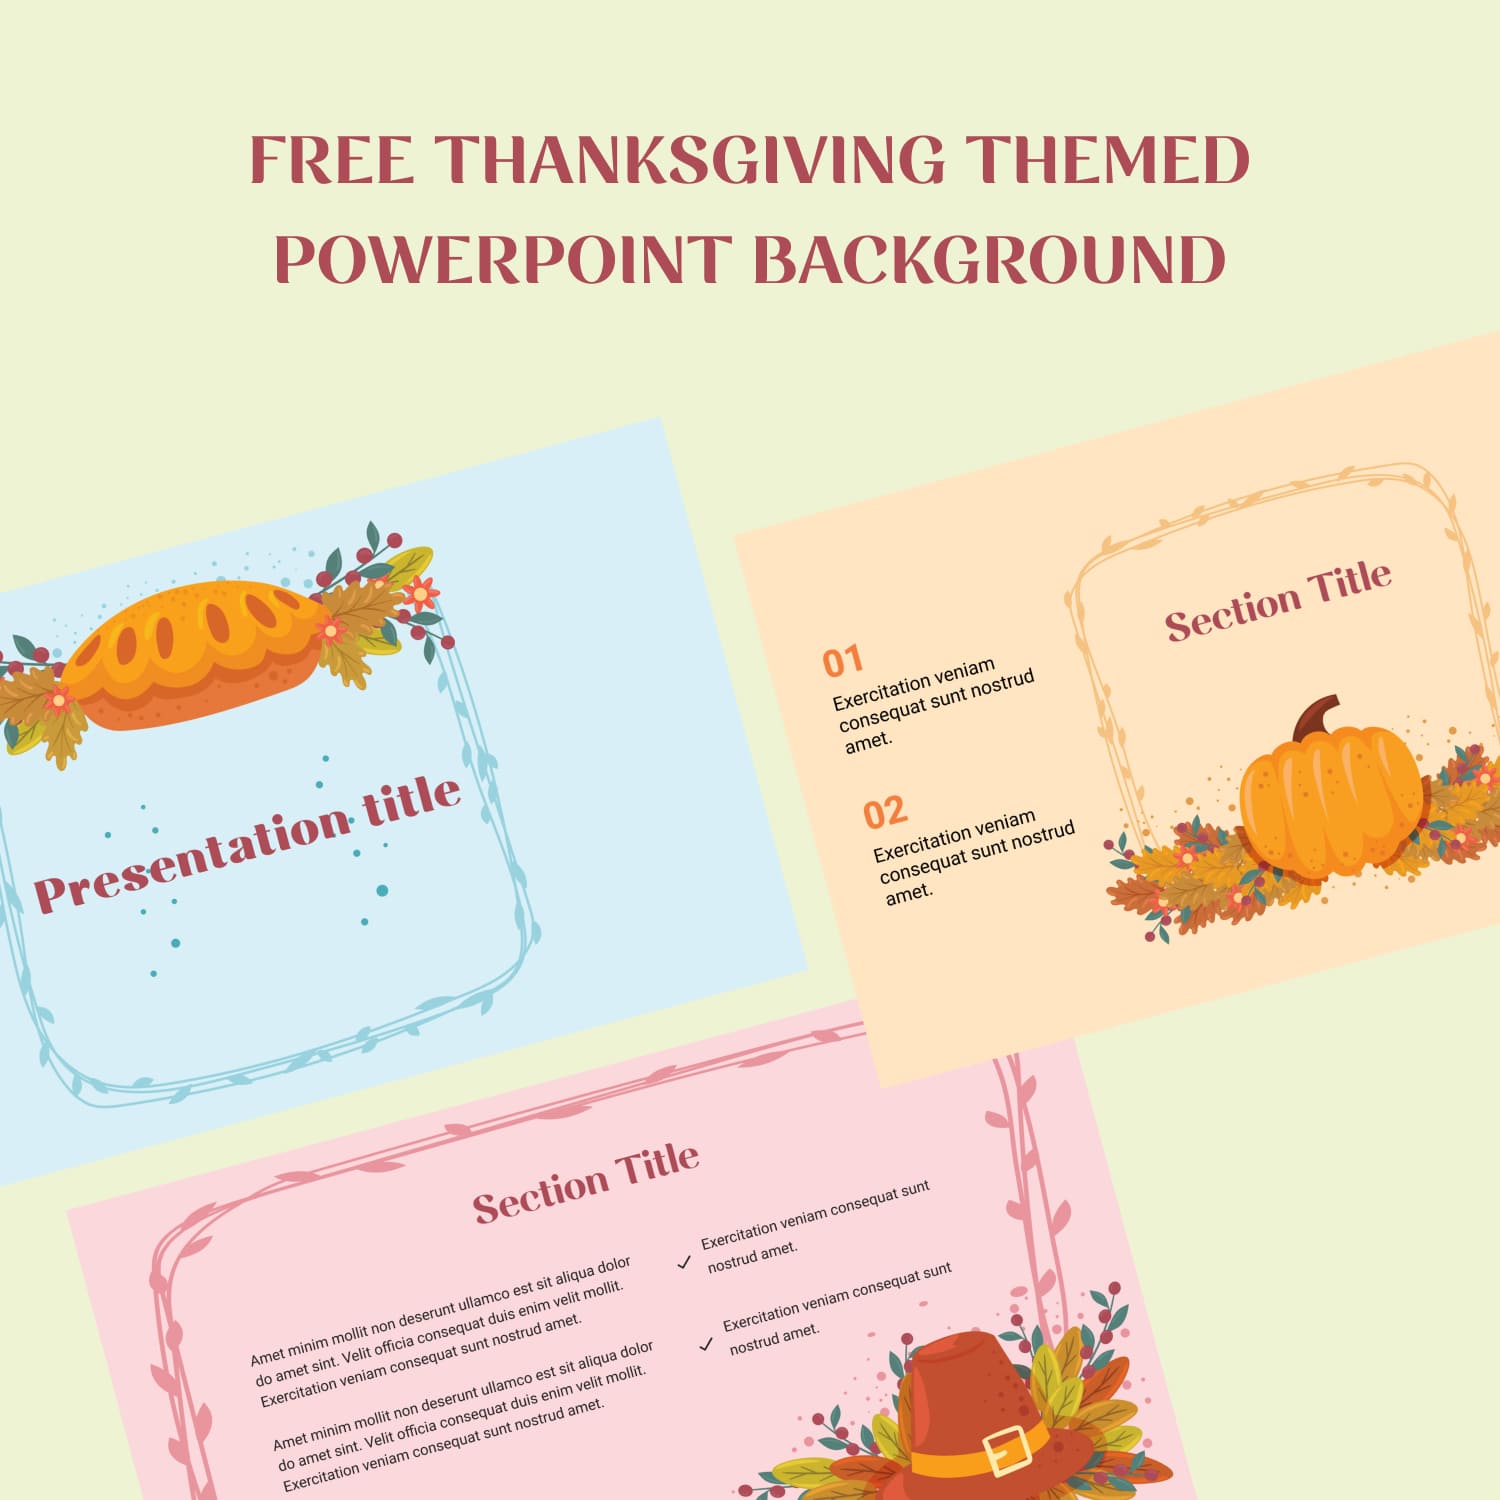 Free Thanksgiving Themed Powerpoint Background.